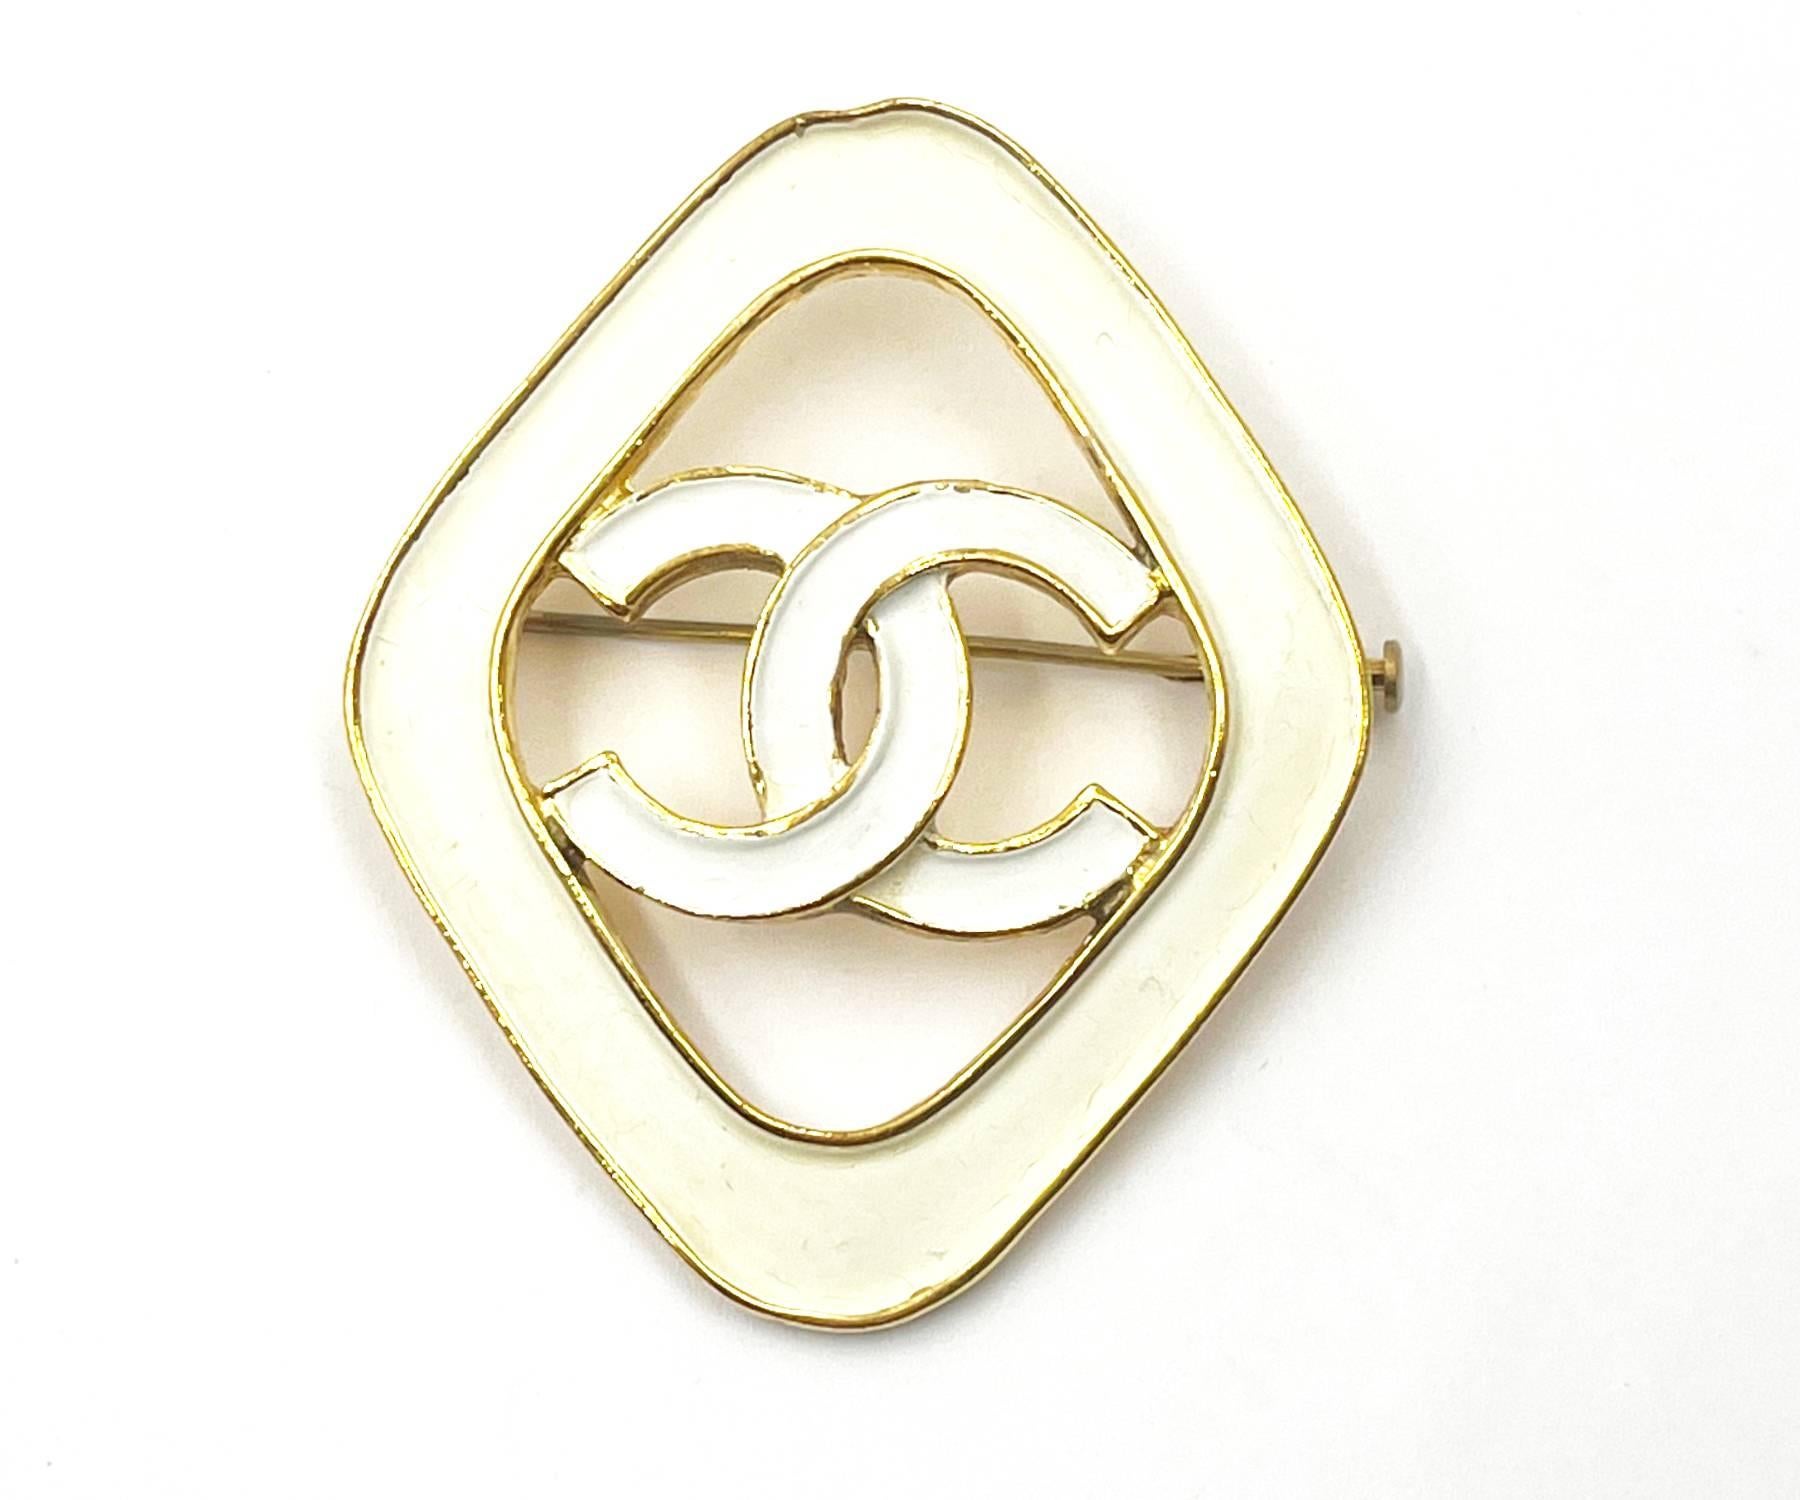 Chanel Rare Vintage Gold Plated Argyle White CC Brooch

*Marked 93
*Made in France
*Comes with an original box

-Approximately 2.1″ x 1.7″
-It has a dent on the top. Some parts of the metal at the back changed a little bit.
-Very rare and it comes